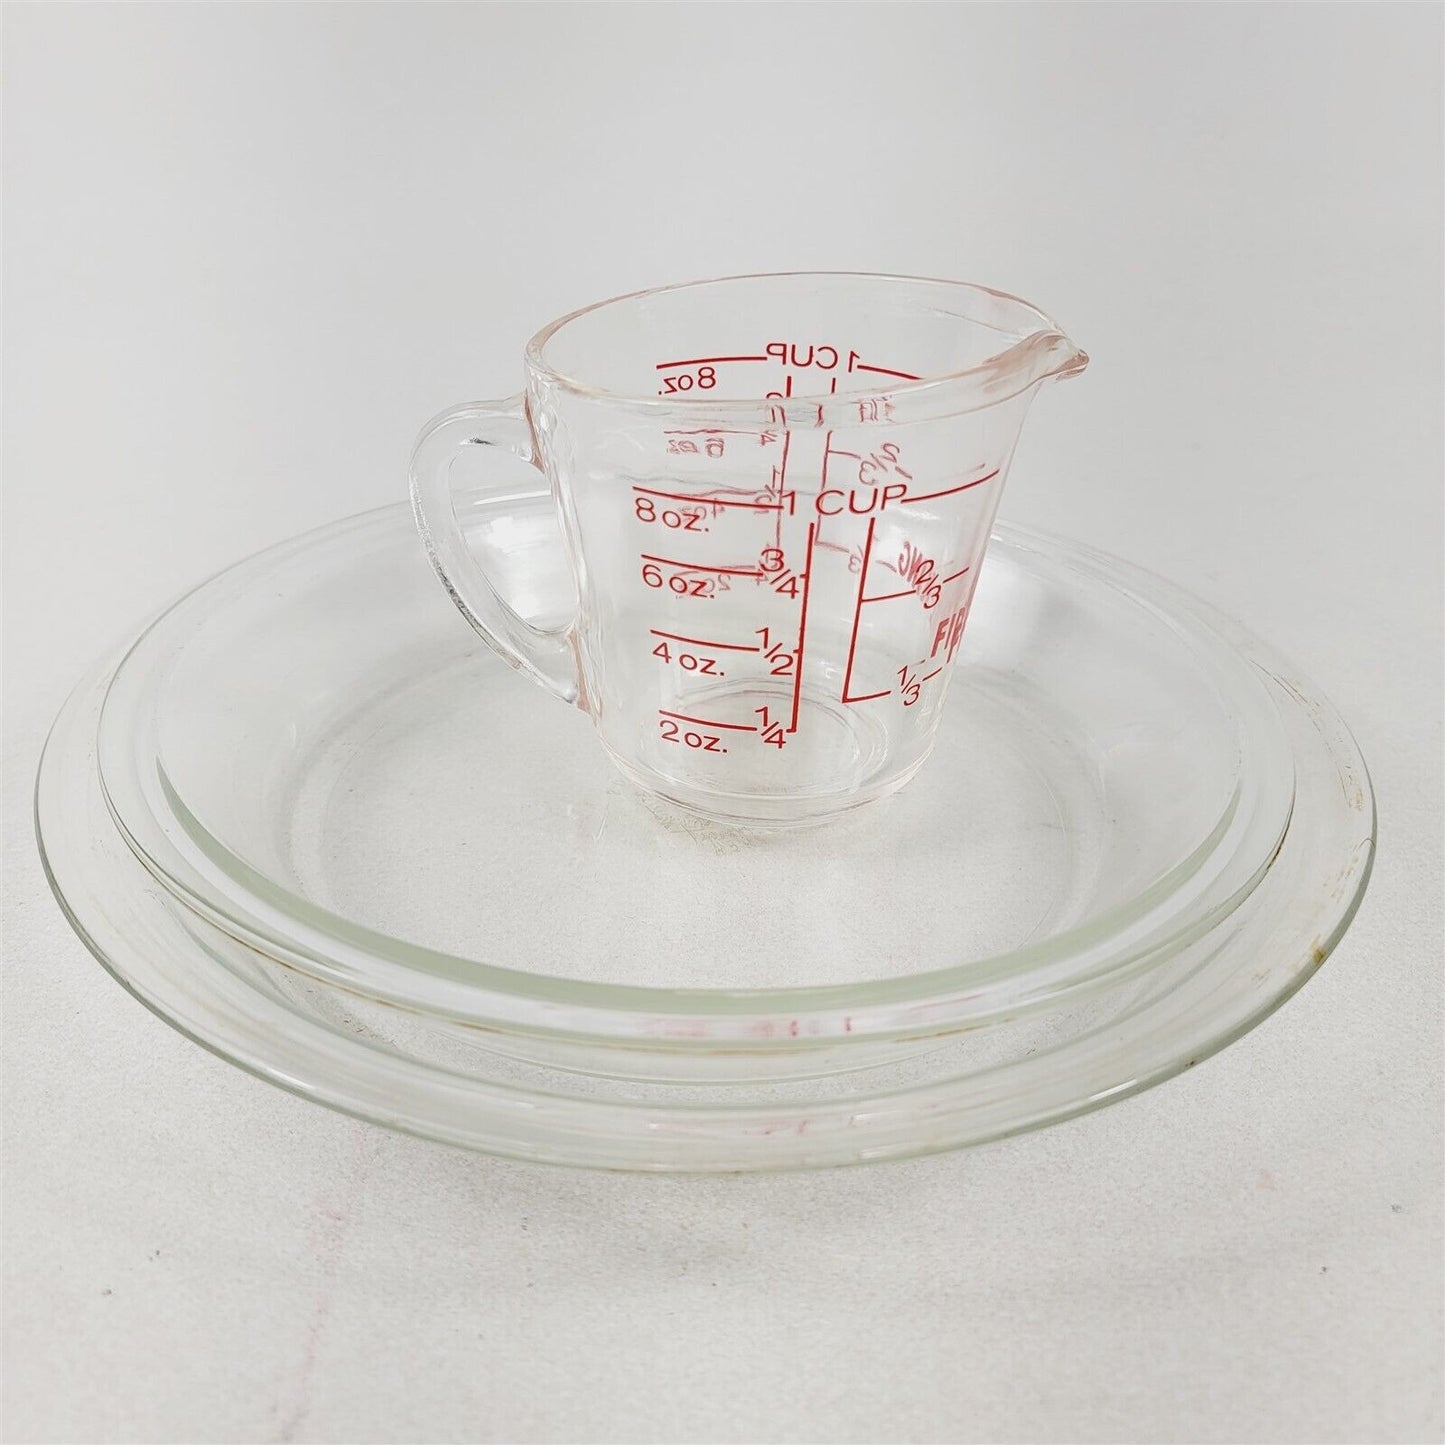 3 Piece Fire King 1 Cup Measuring Cup #496 & 2 Pyrex Pie Plates 8" #208, 9" #209